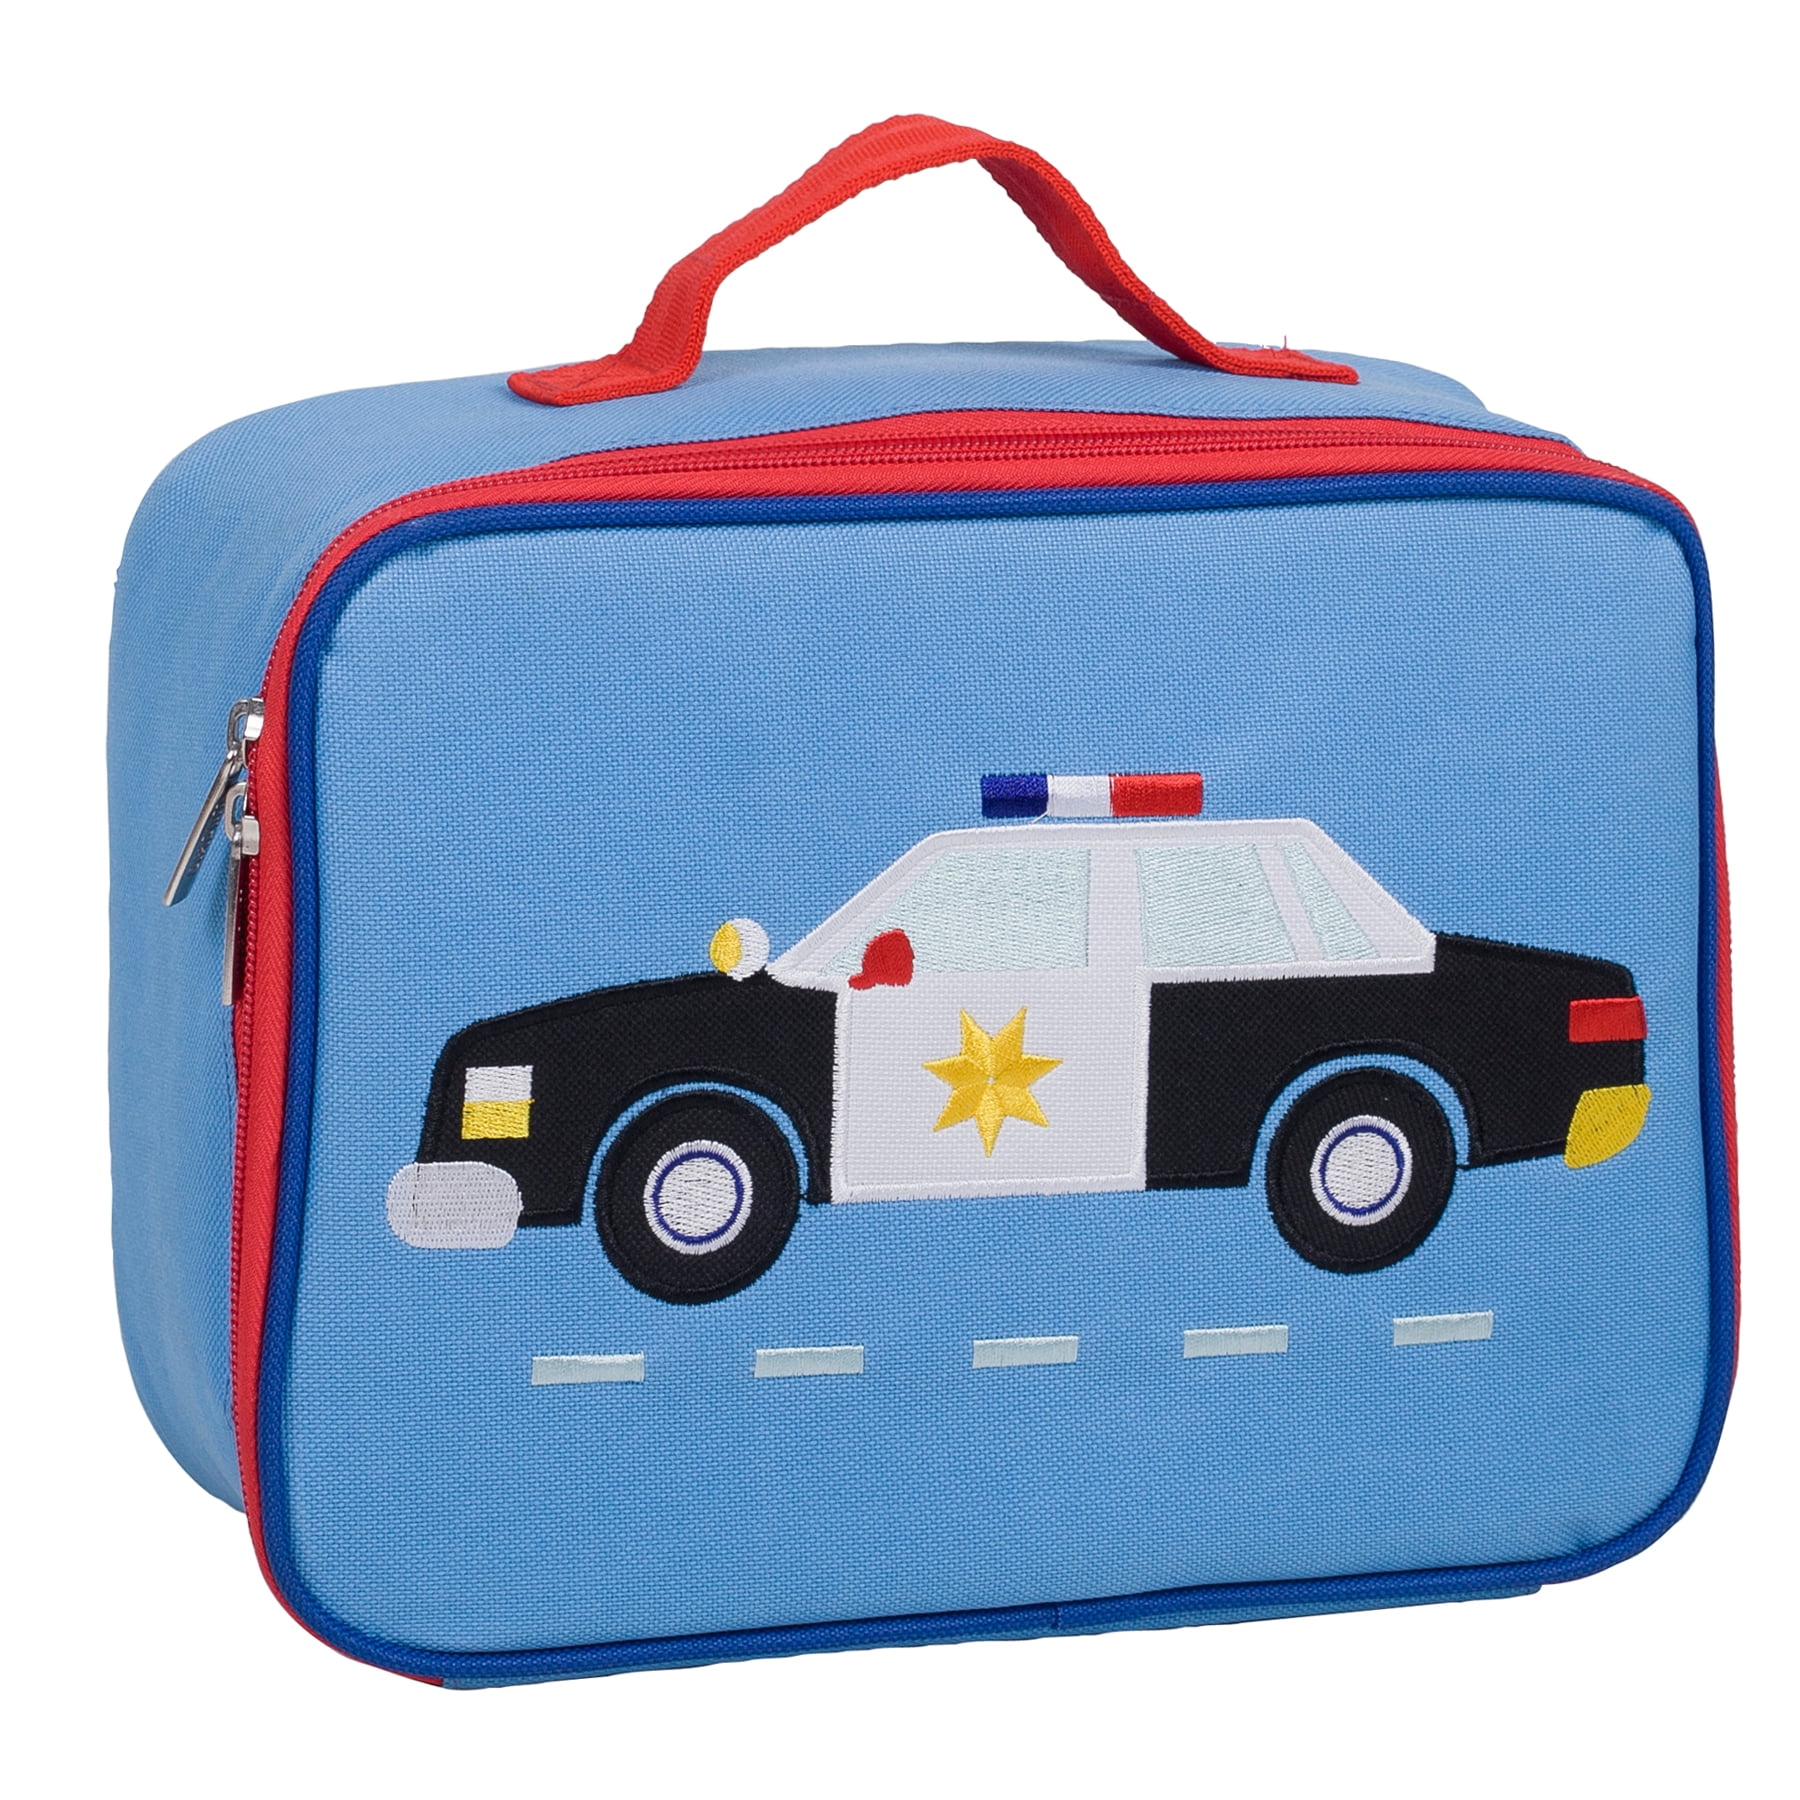 Mepal Lunch Box With Desired Name Personalized Lunch Box With a Blue  Tractor for Daycare / Kindergarten or School 